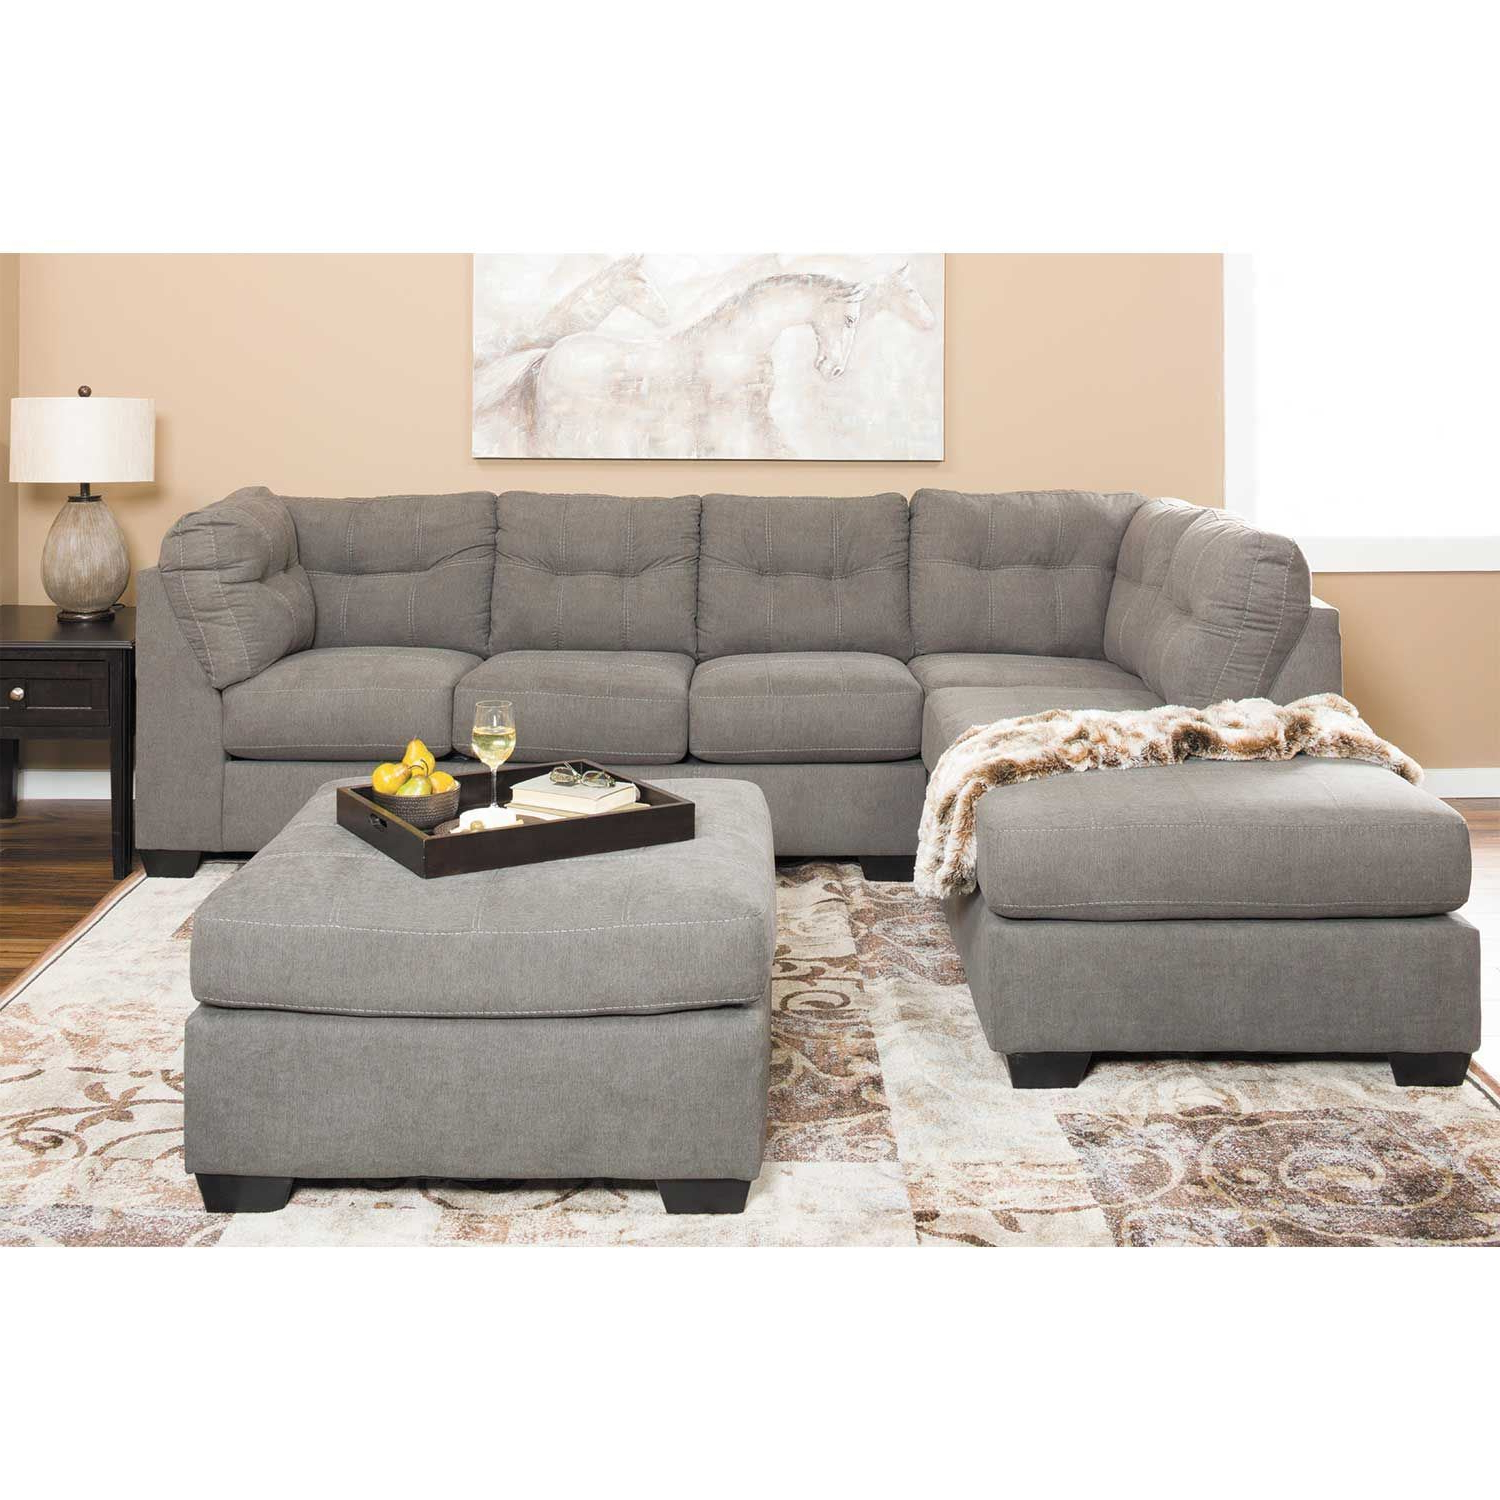 Arrowmask 2 Piece Sectionals With Laf Chaise